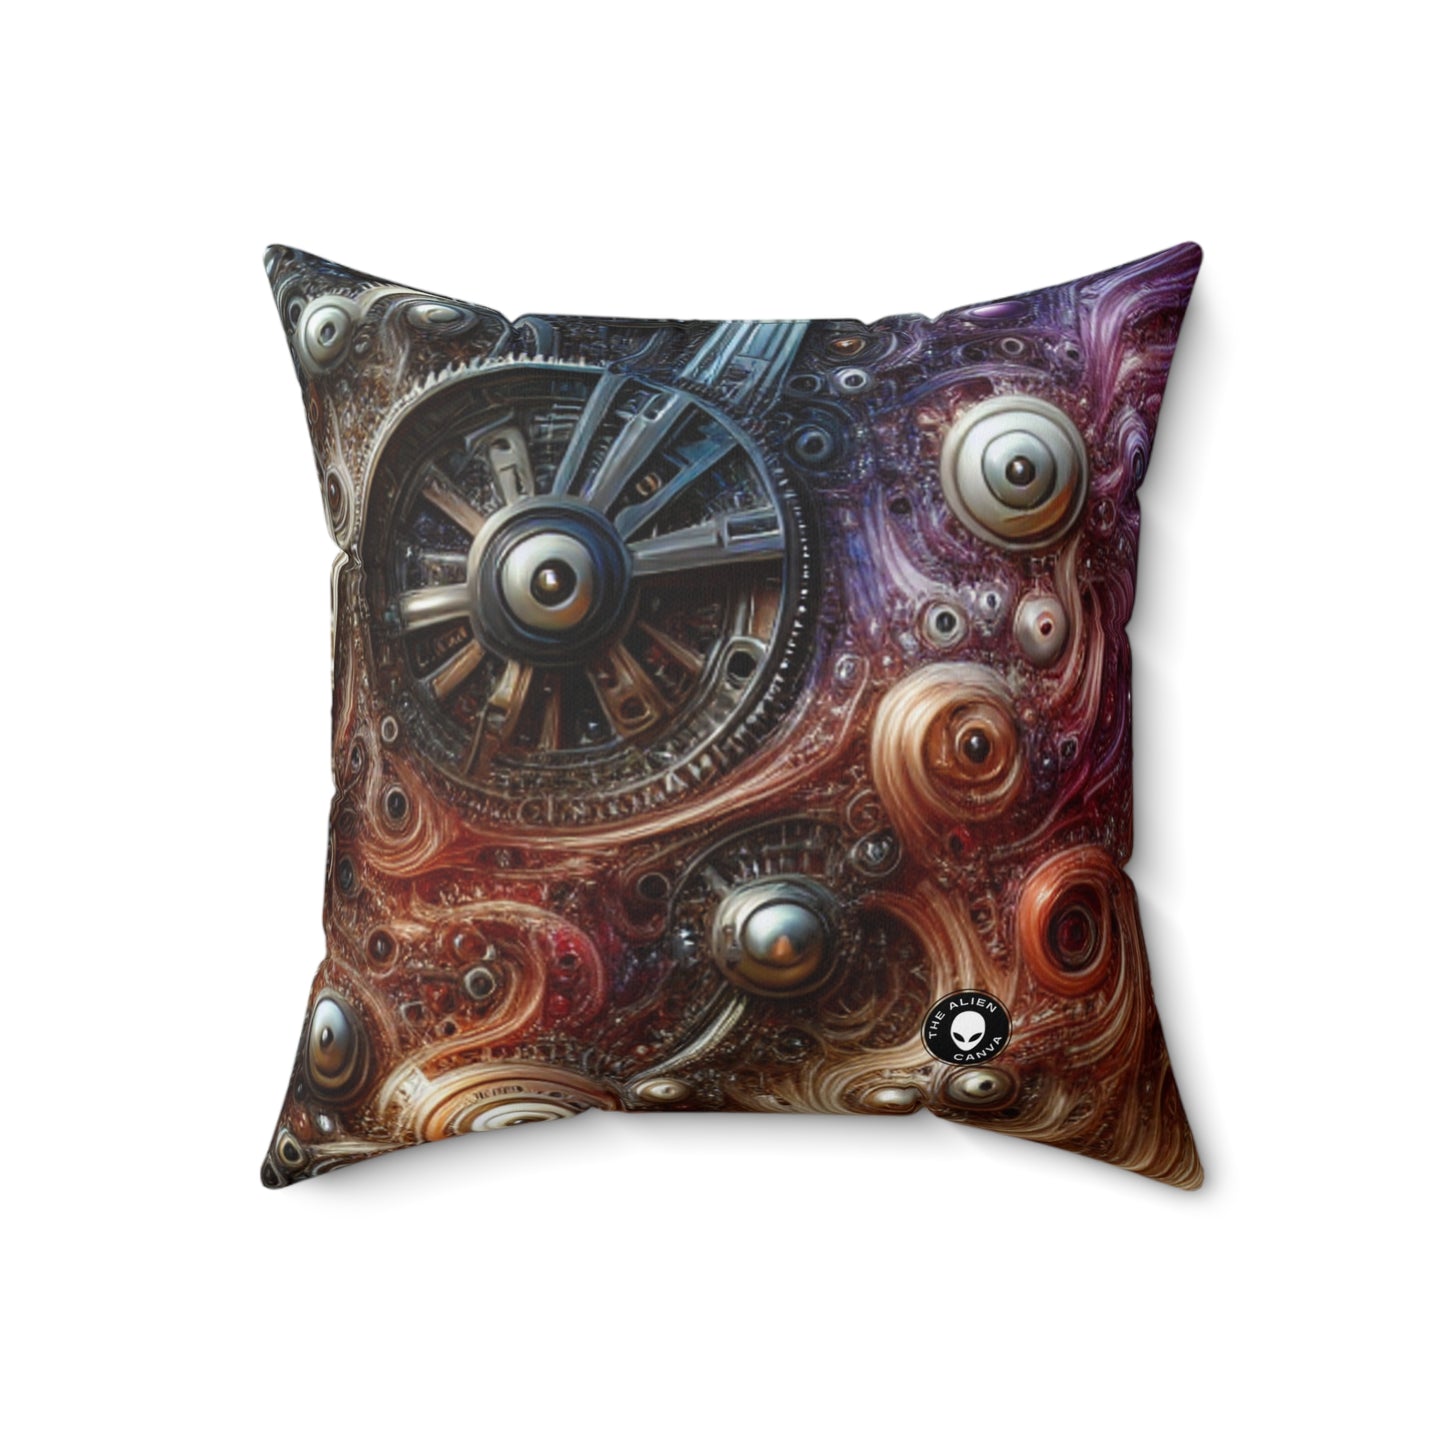 "Cybernetic Sentinel: A Futuristic Fusion of Man and Machine"- The Alien Spun Polyester Square Pillow Bio-mechanical Art